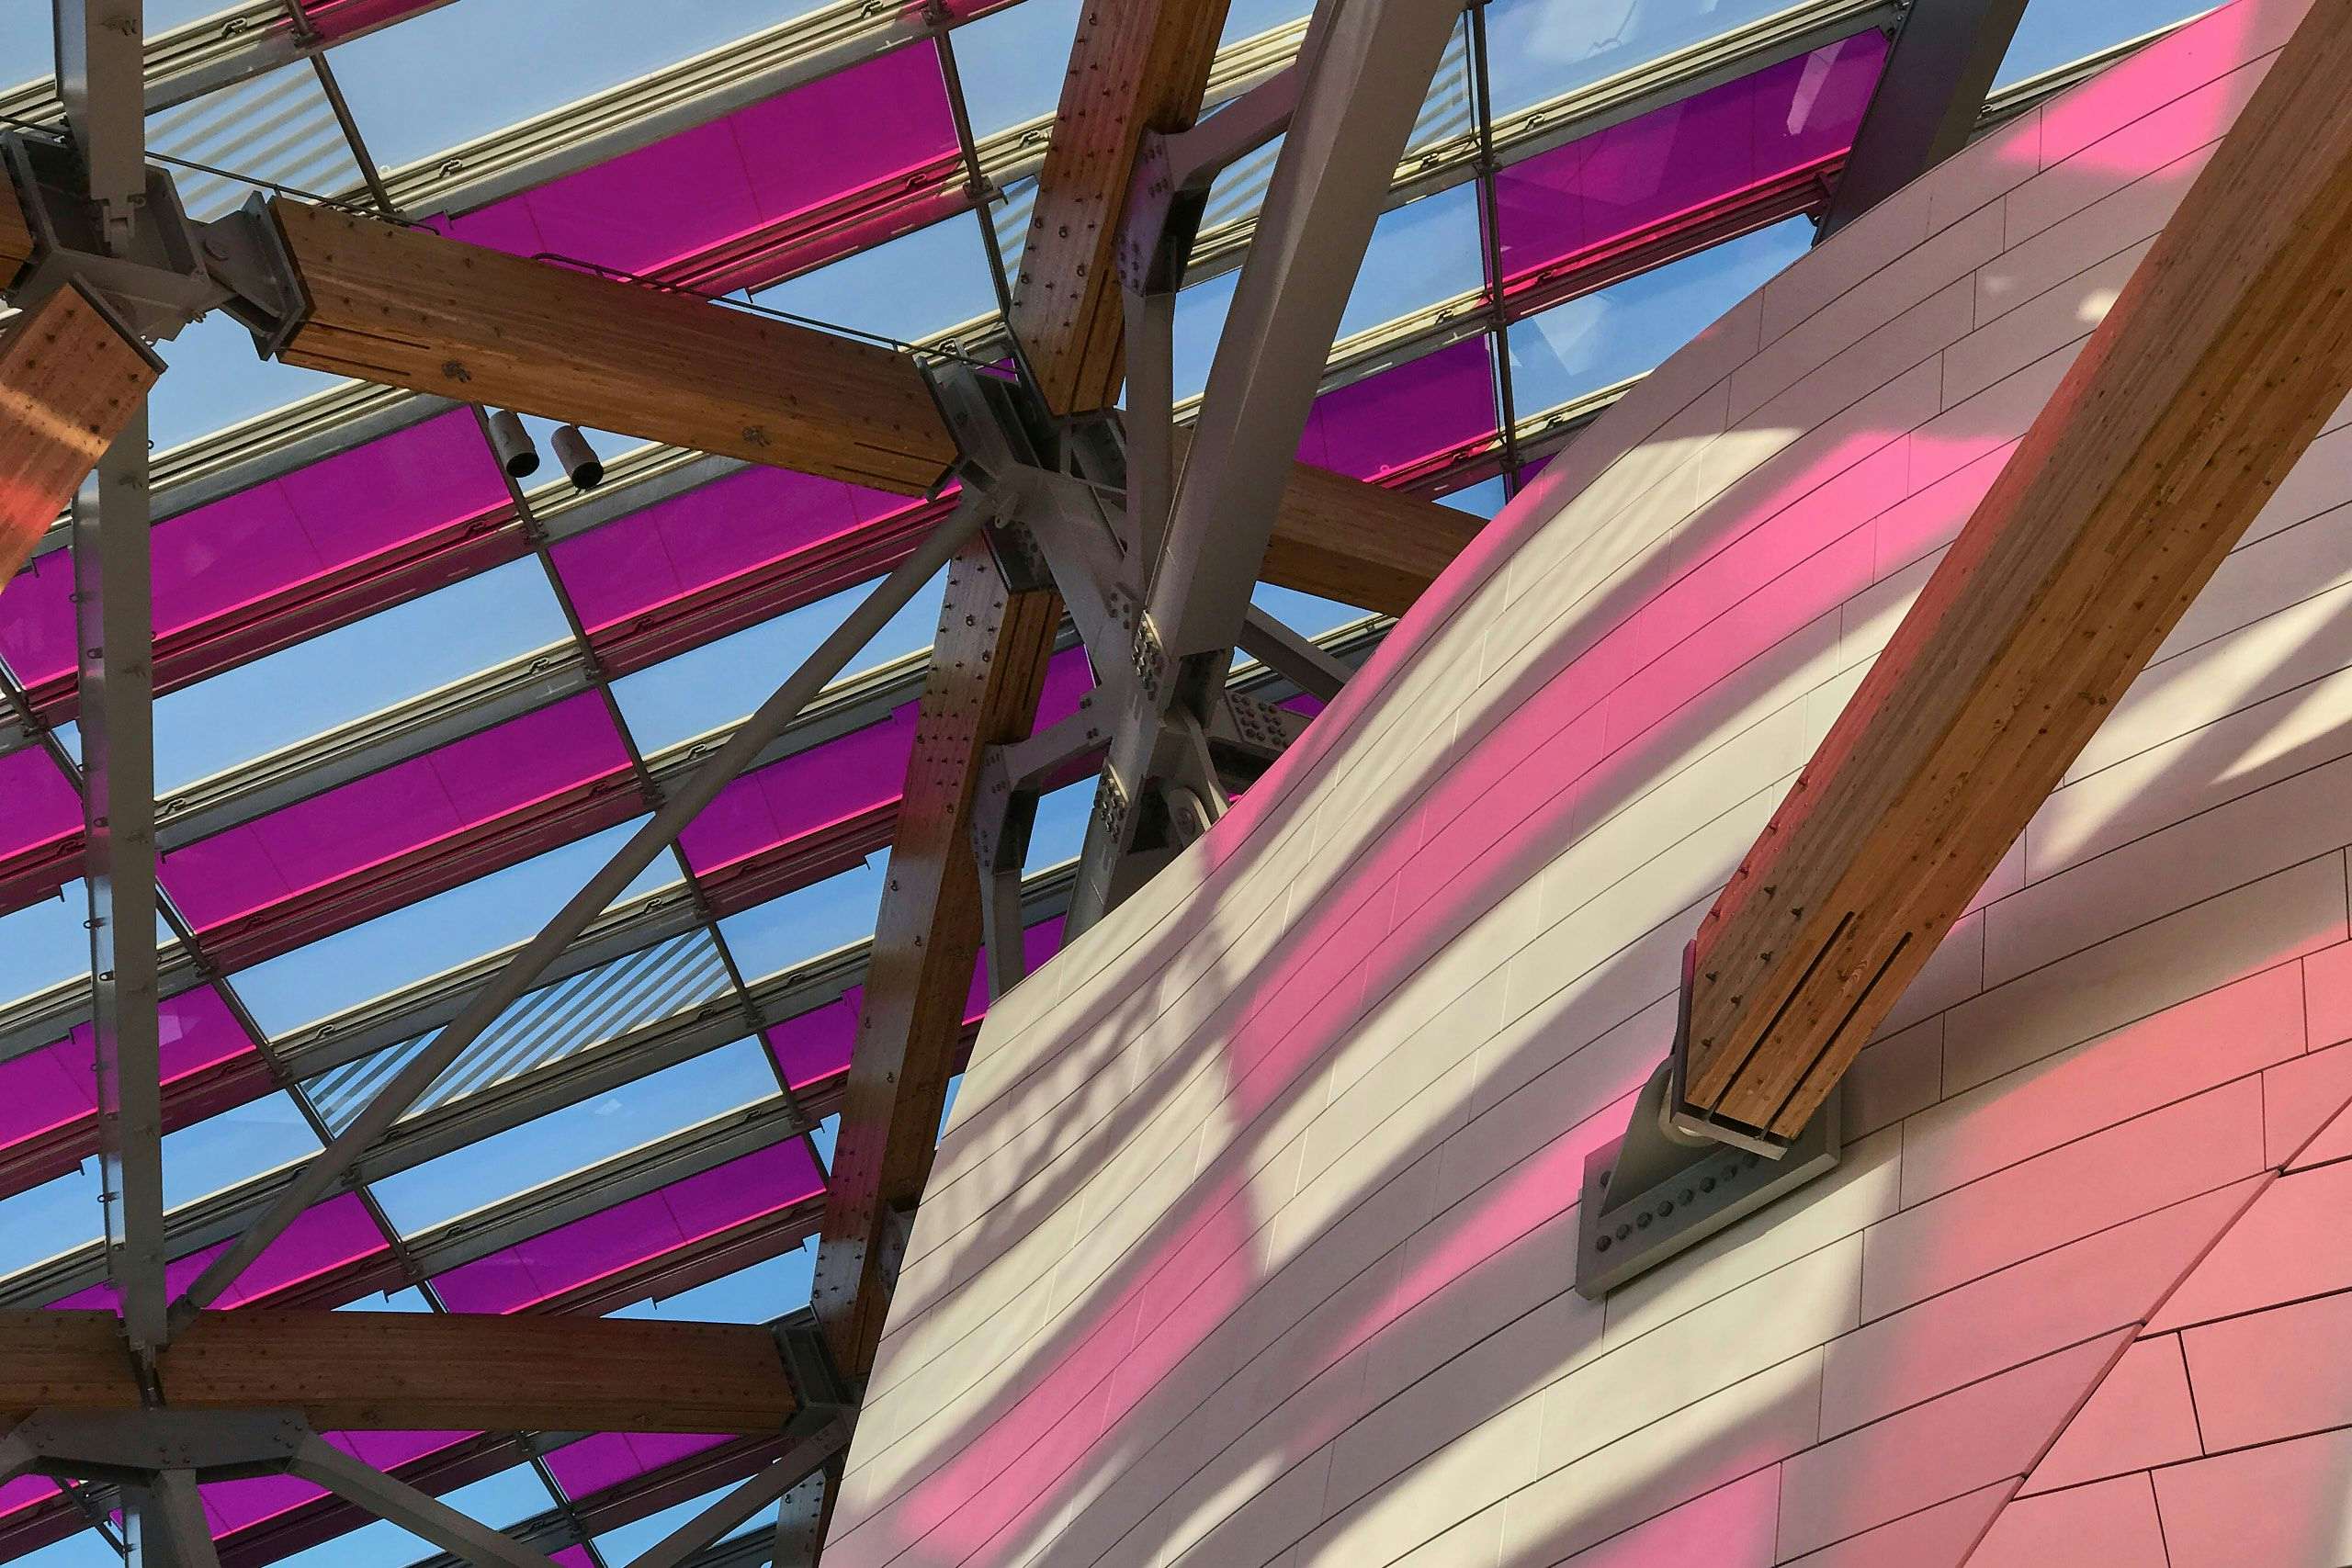 Louis Vuitton foundation glass roof detail. Photography: Xavier Wendling